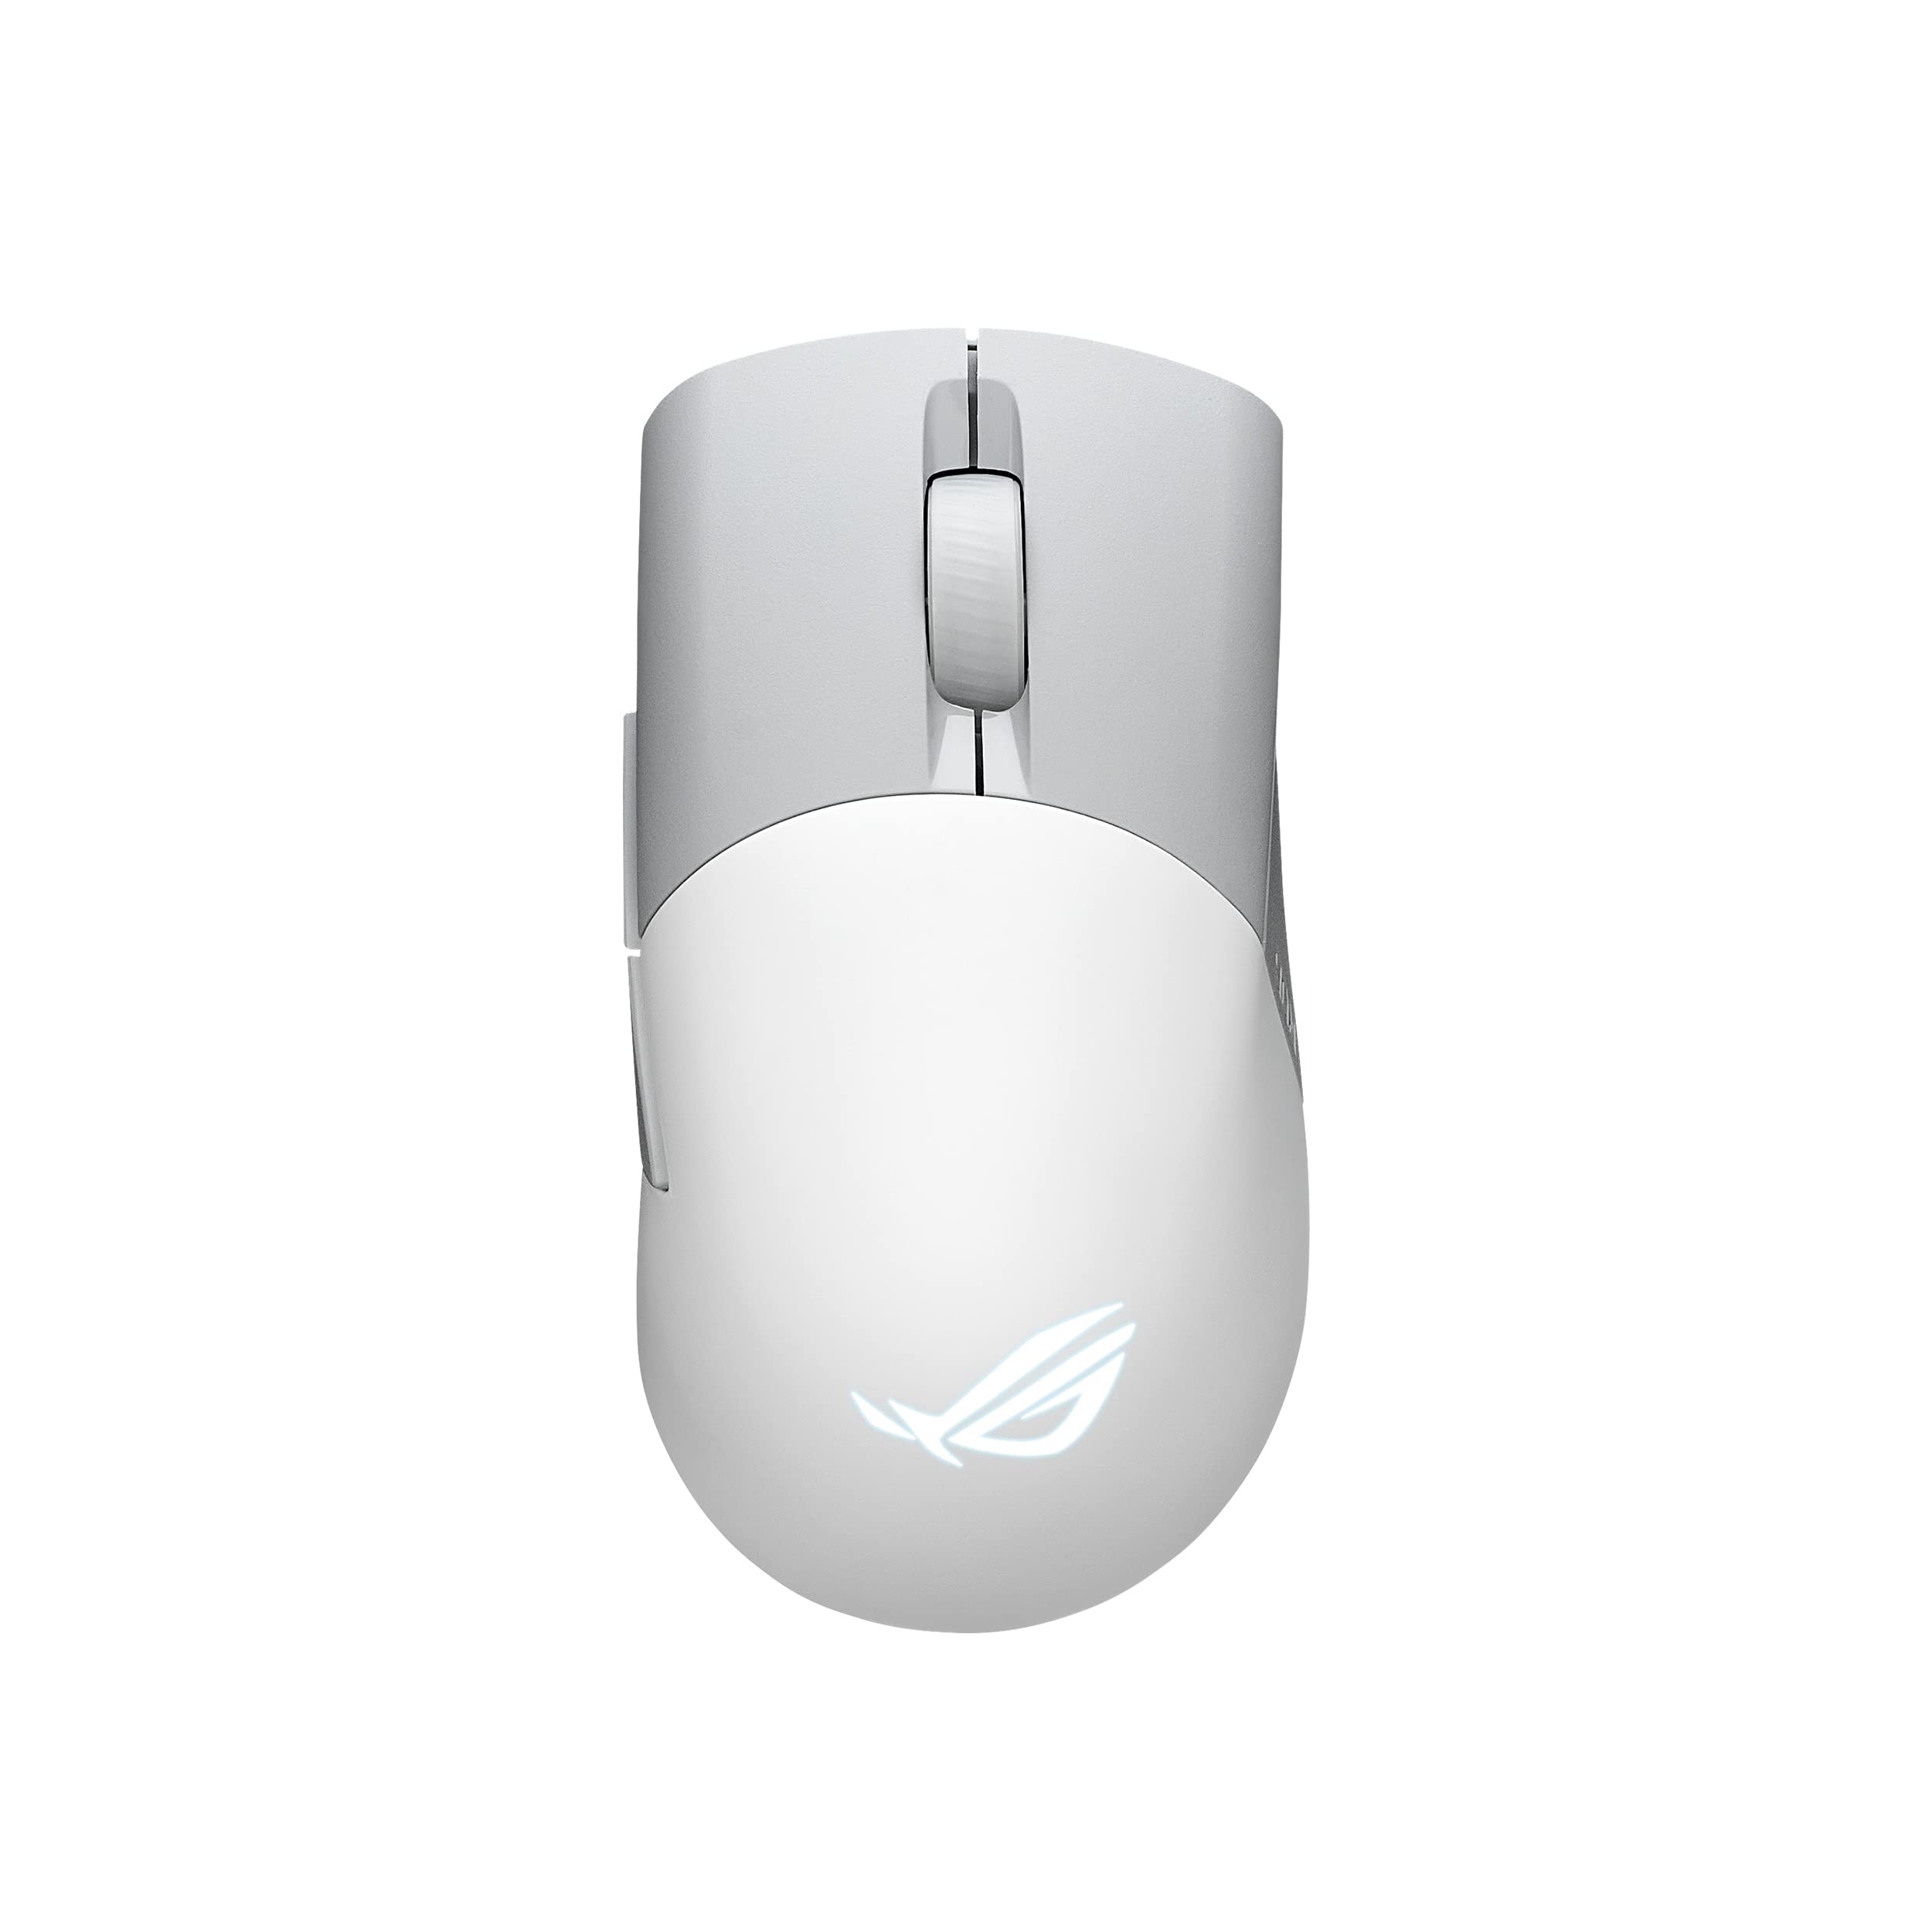 Asus ROG Keris Wireless AimPoint Gaming Mouse (White) + Ghostrunner 2 (PC Digital Download) $60 + Free Shipping